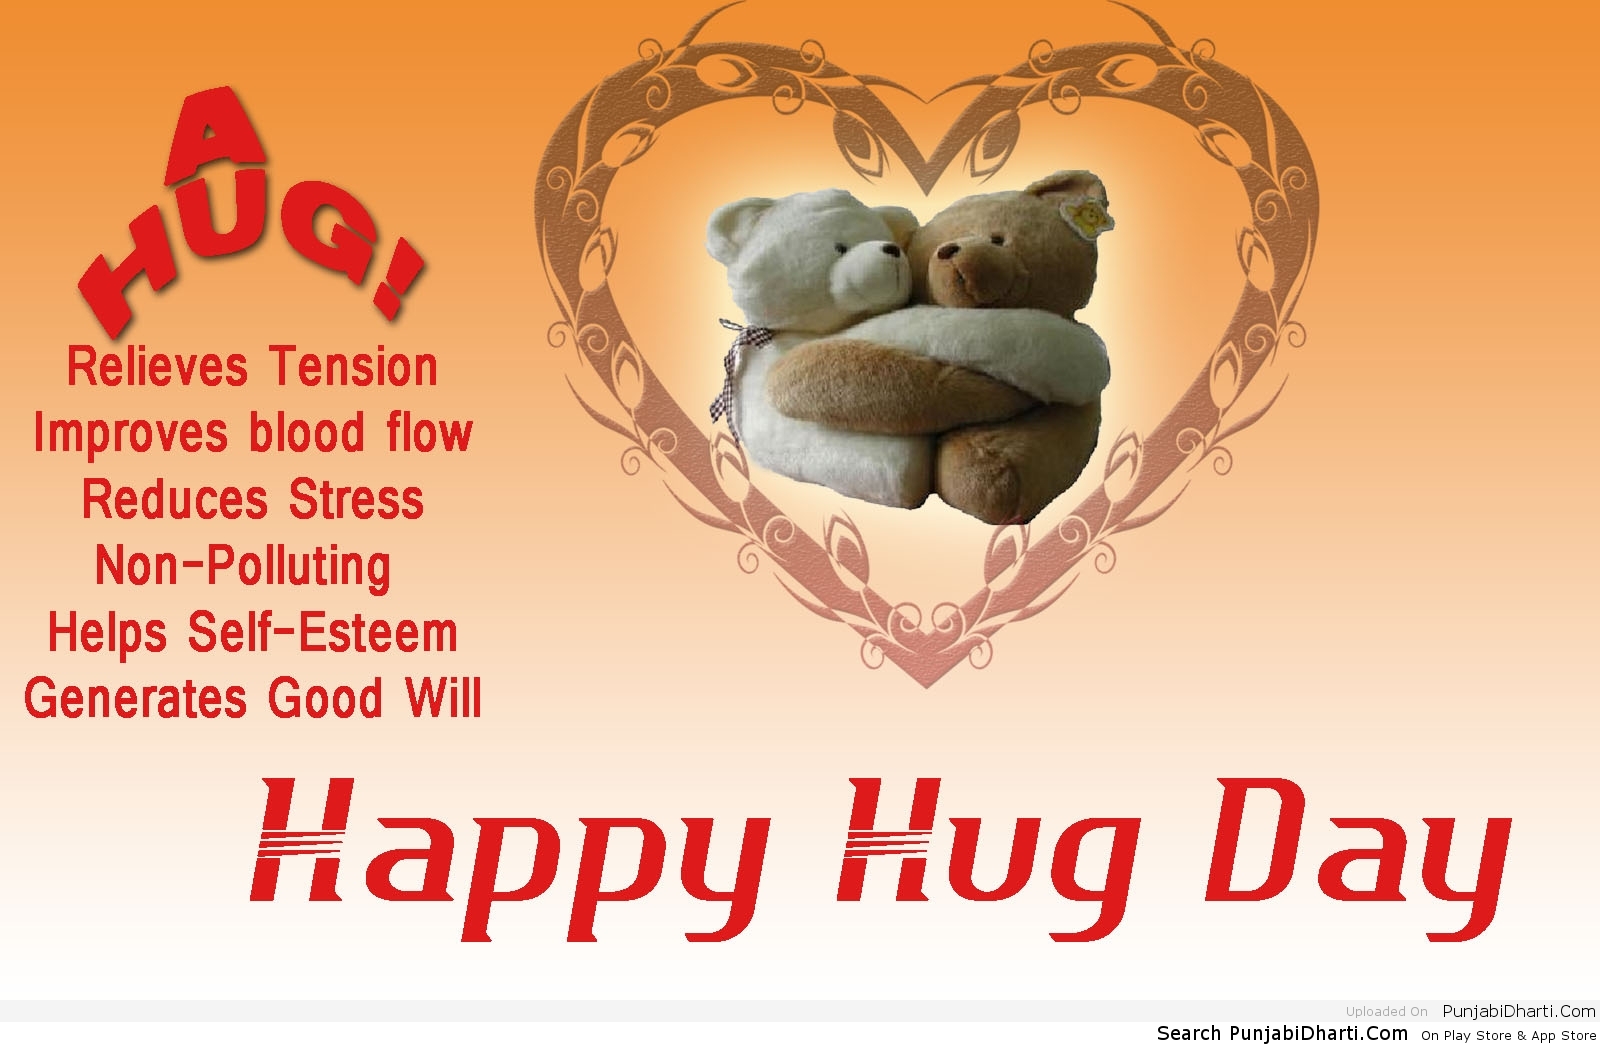 Hug Day Graphics, Image For Facebook, Whatsapp, Twitter